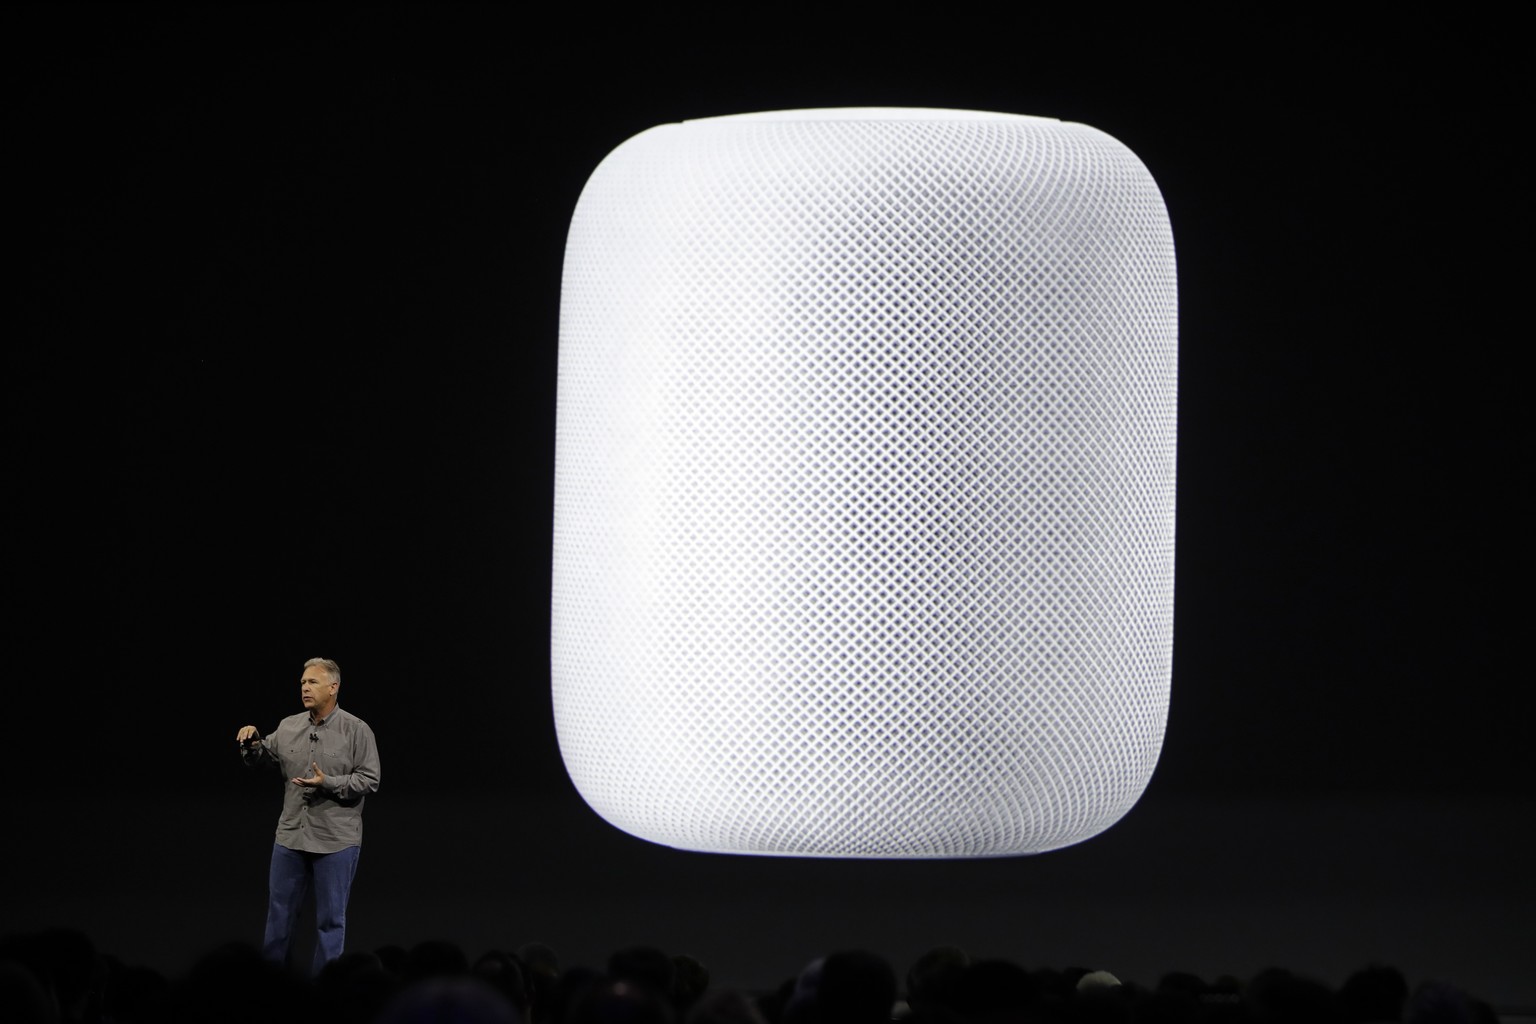 Phil Schiller, Apple&#039;s Senior Vice President of Worldwide Marketing, introduces the HomePod speaker at the Apple Worldwide Developers Conference Monday, June 5, 2017, in San Jose , Calif. (AP Pho ...